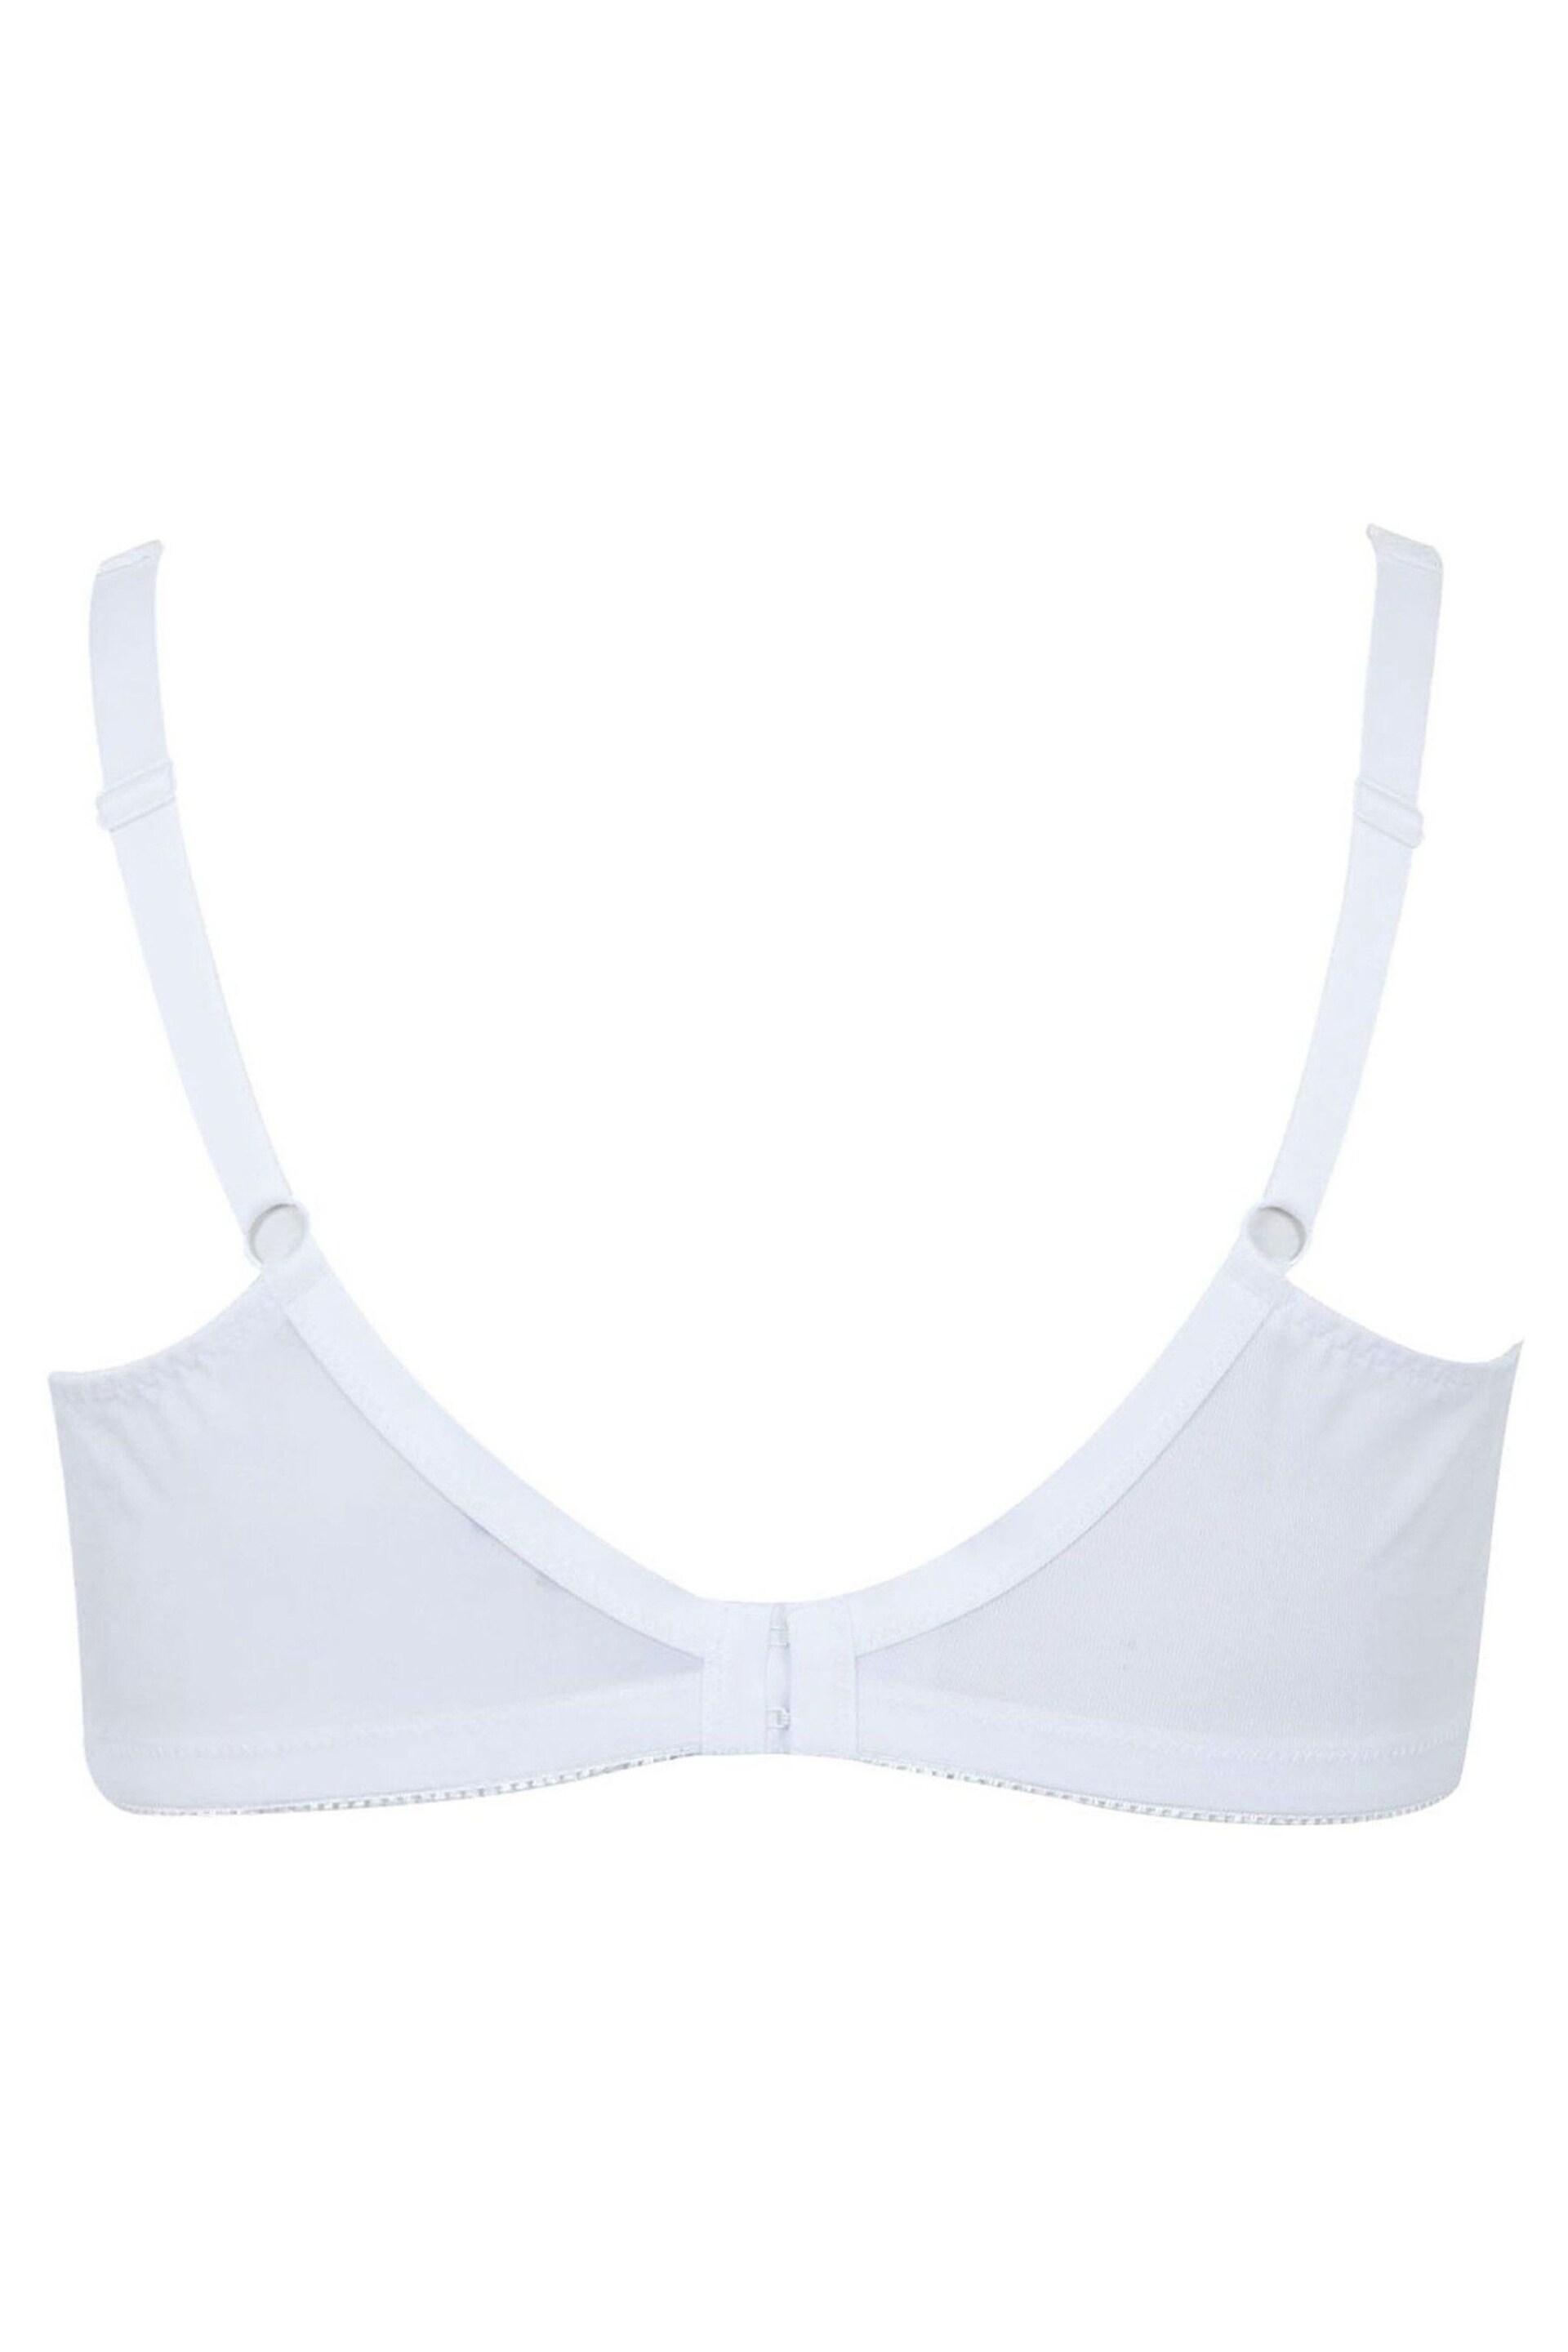 Yours Curve White Hi Shine Lace Non-Wired Bra - Image 4 of 4